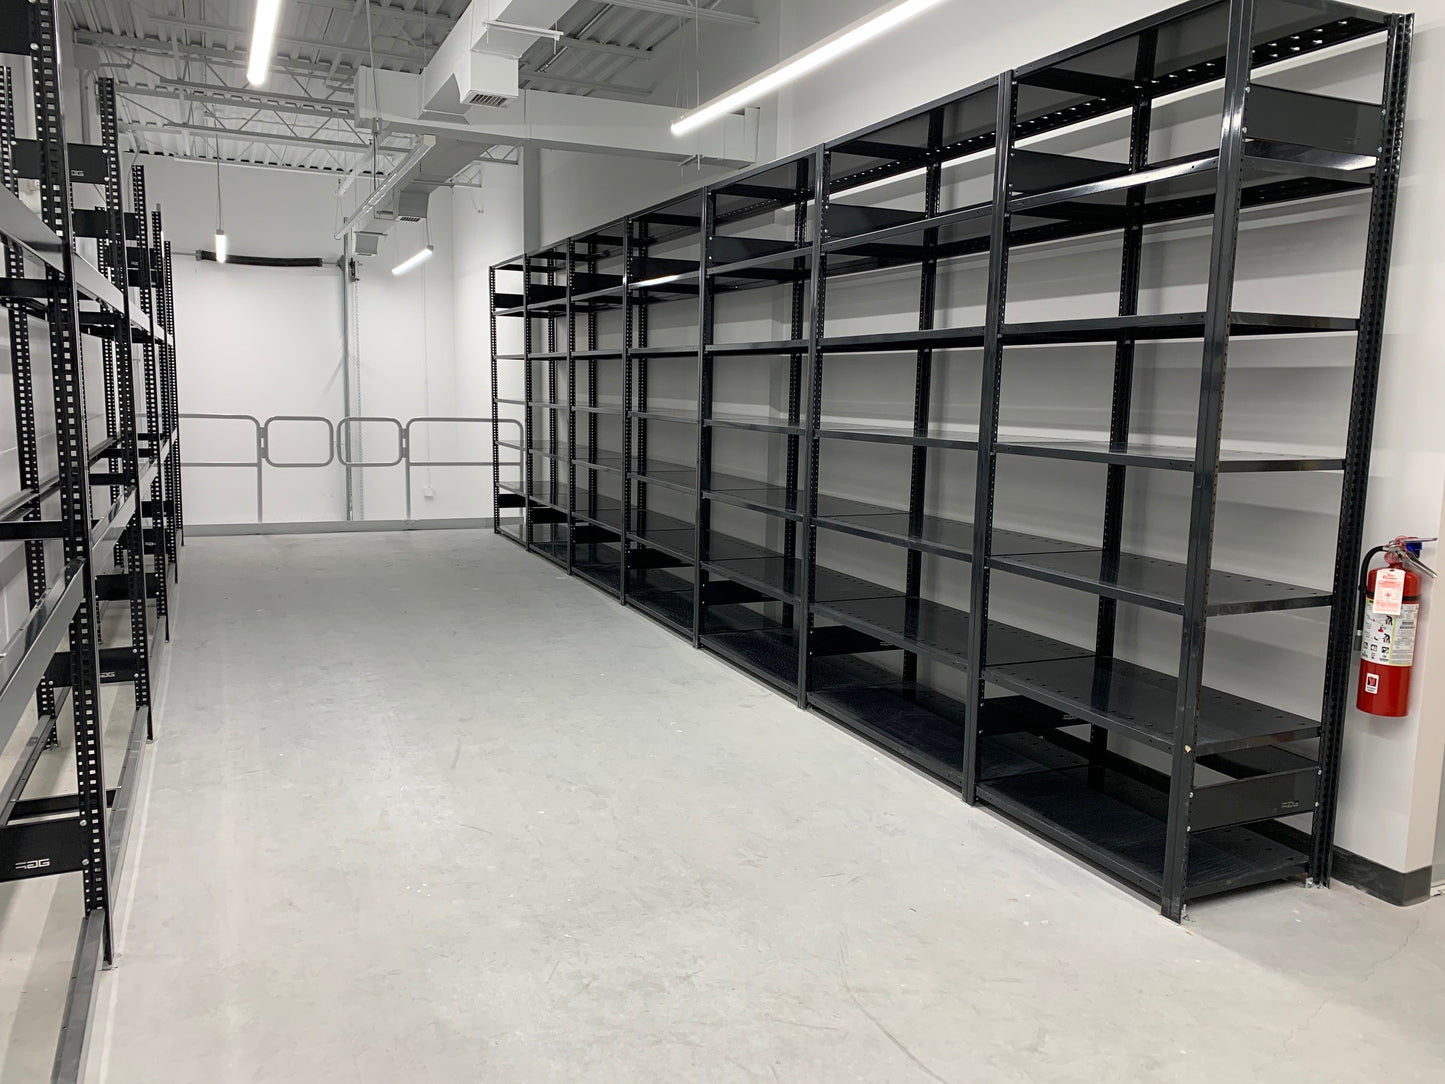 Shelving system 75 height x 36 width x 24 depth | Option: Open / Closed